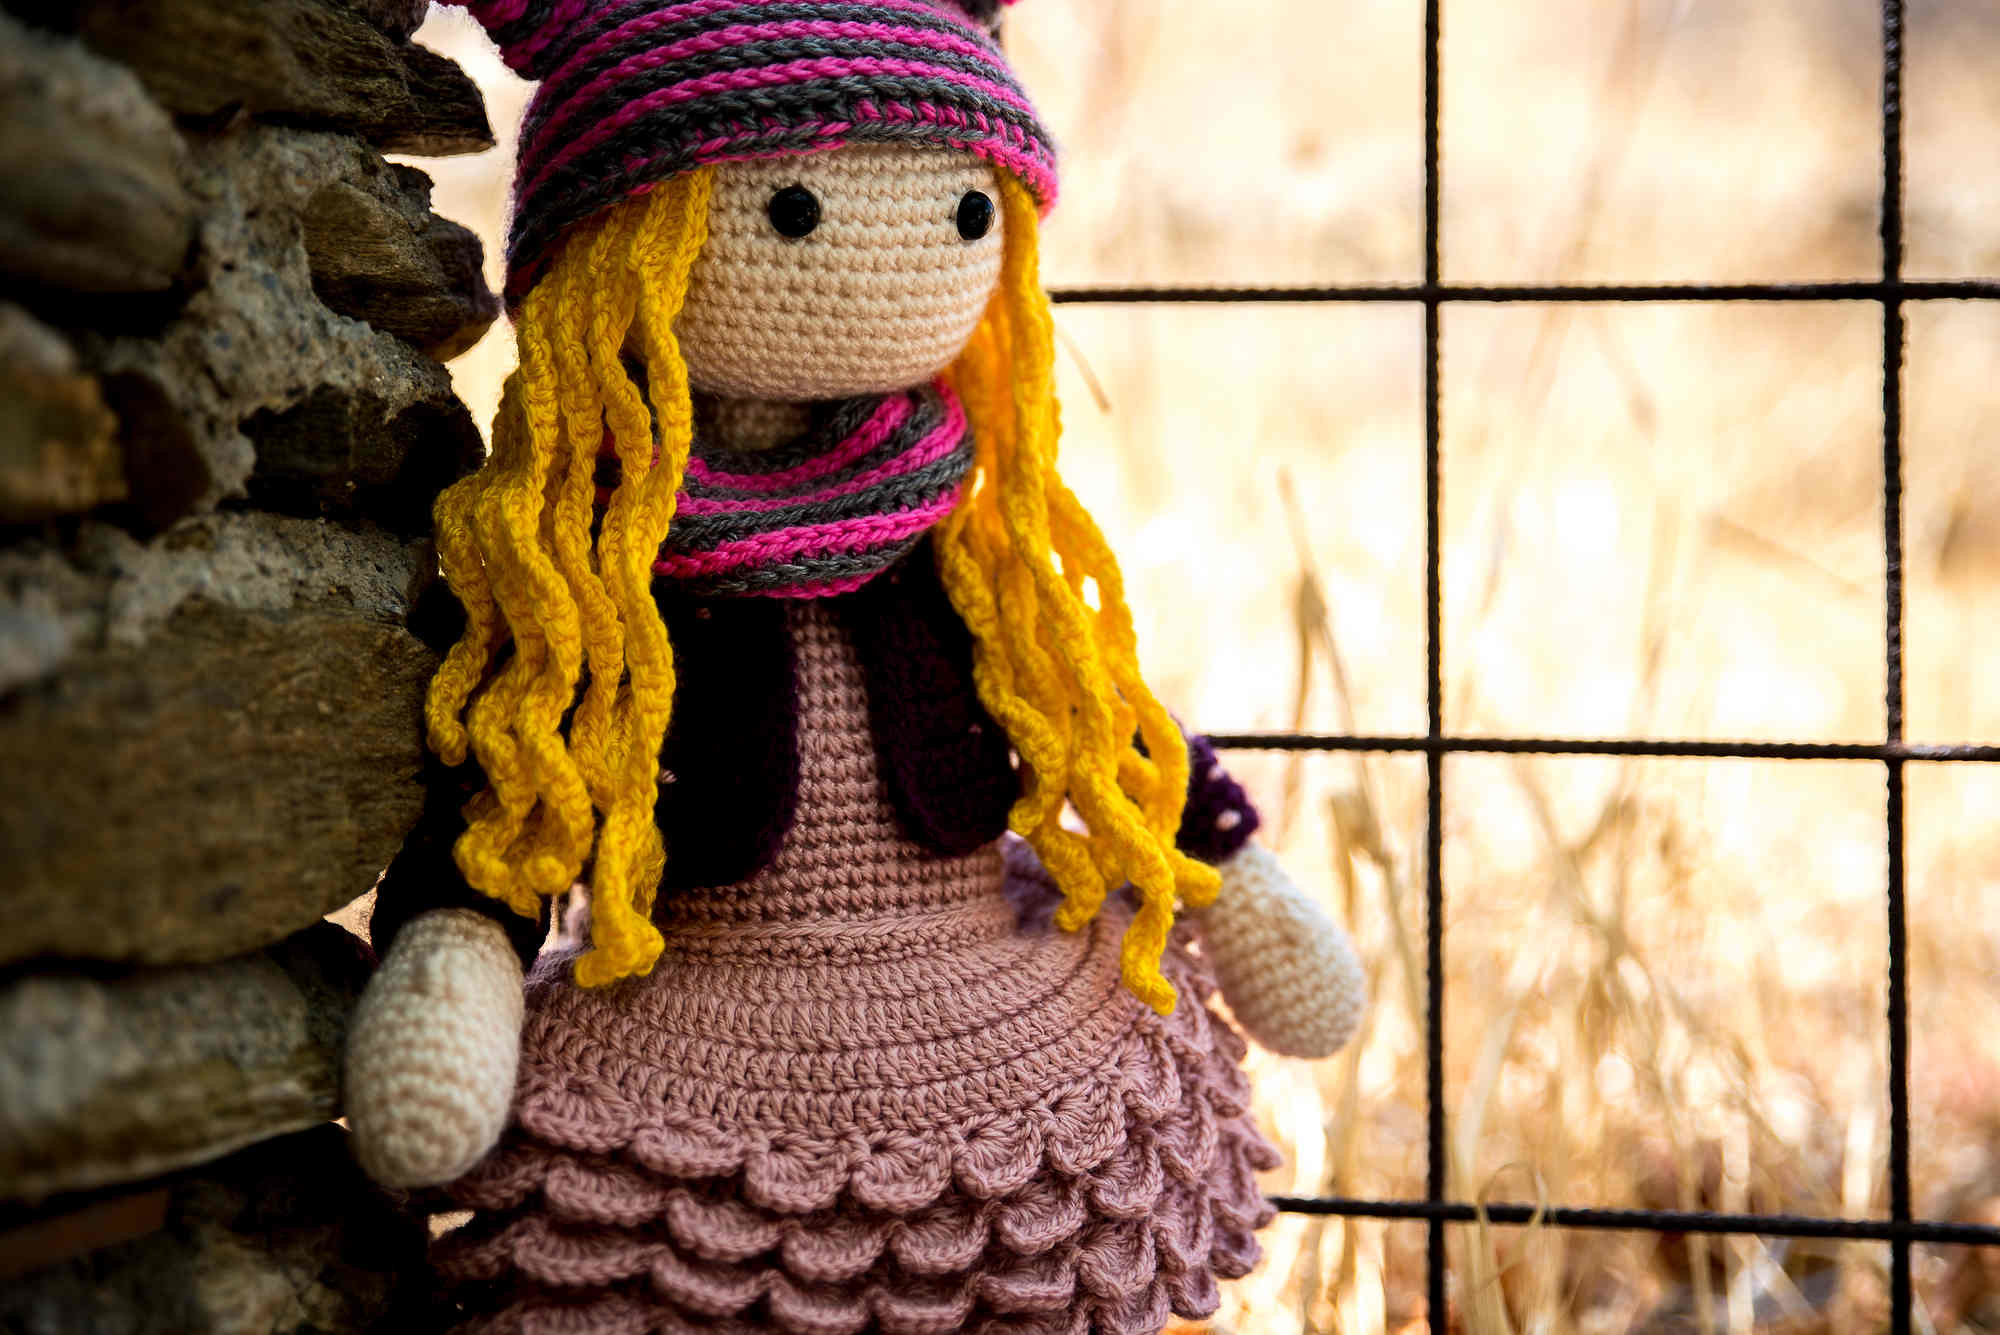 A crochet doll | Source: Flickr